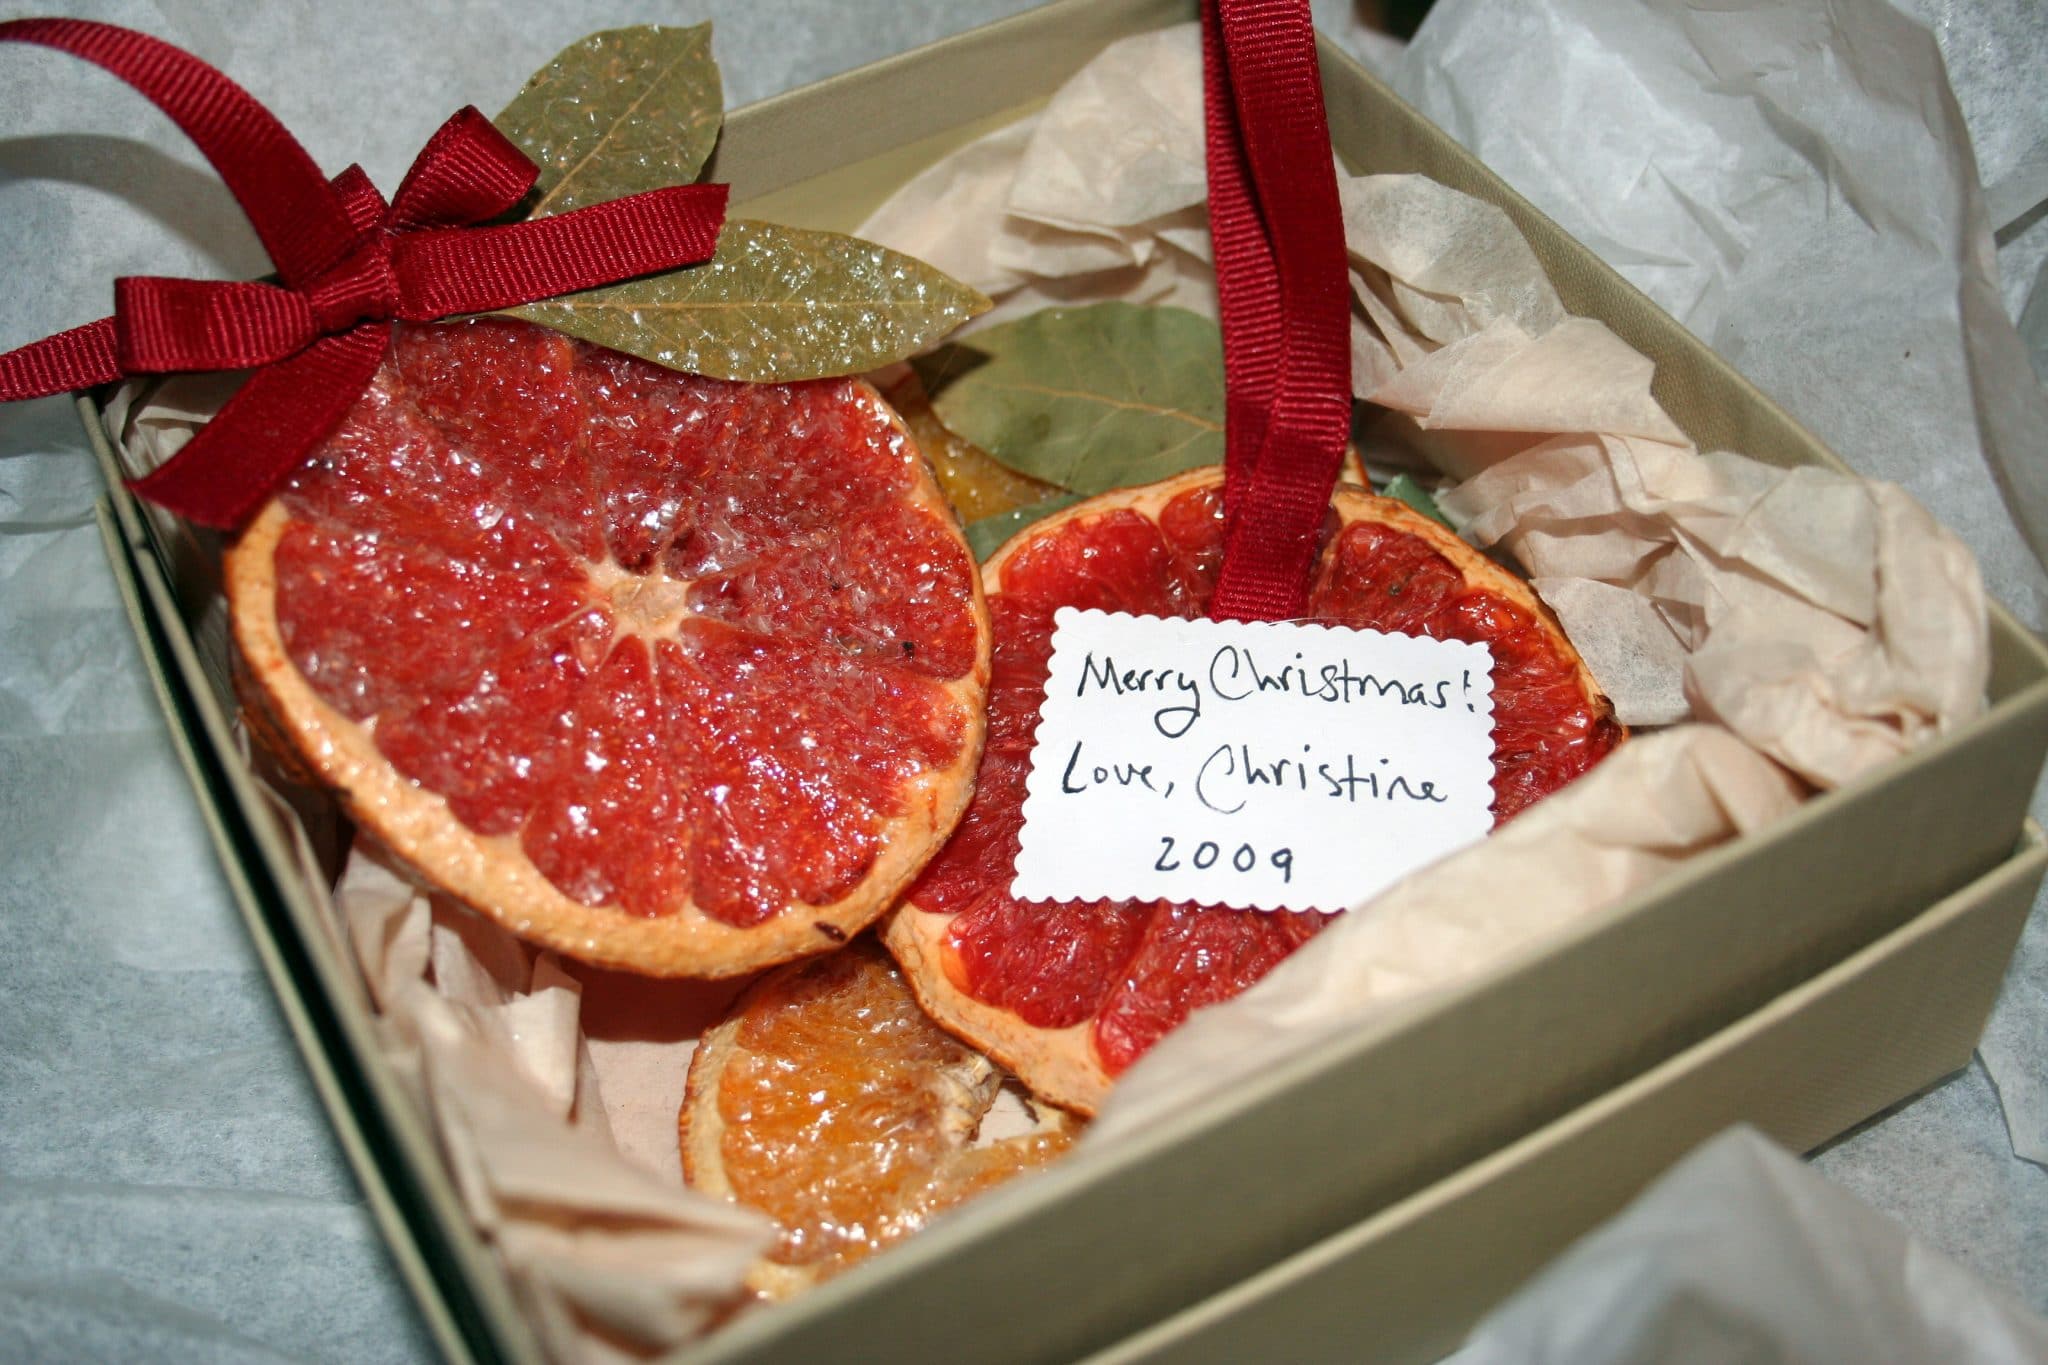 Baked Ornaments in a box with Christmas tag 2009